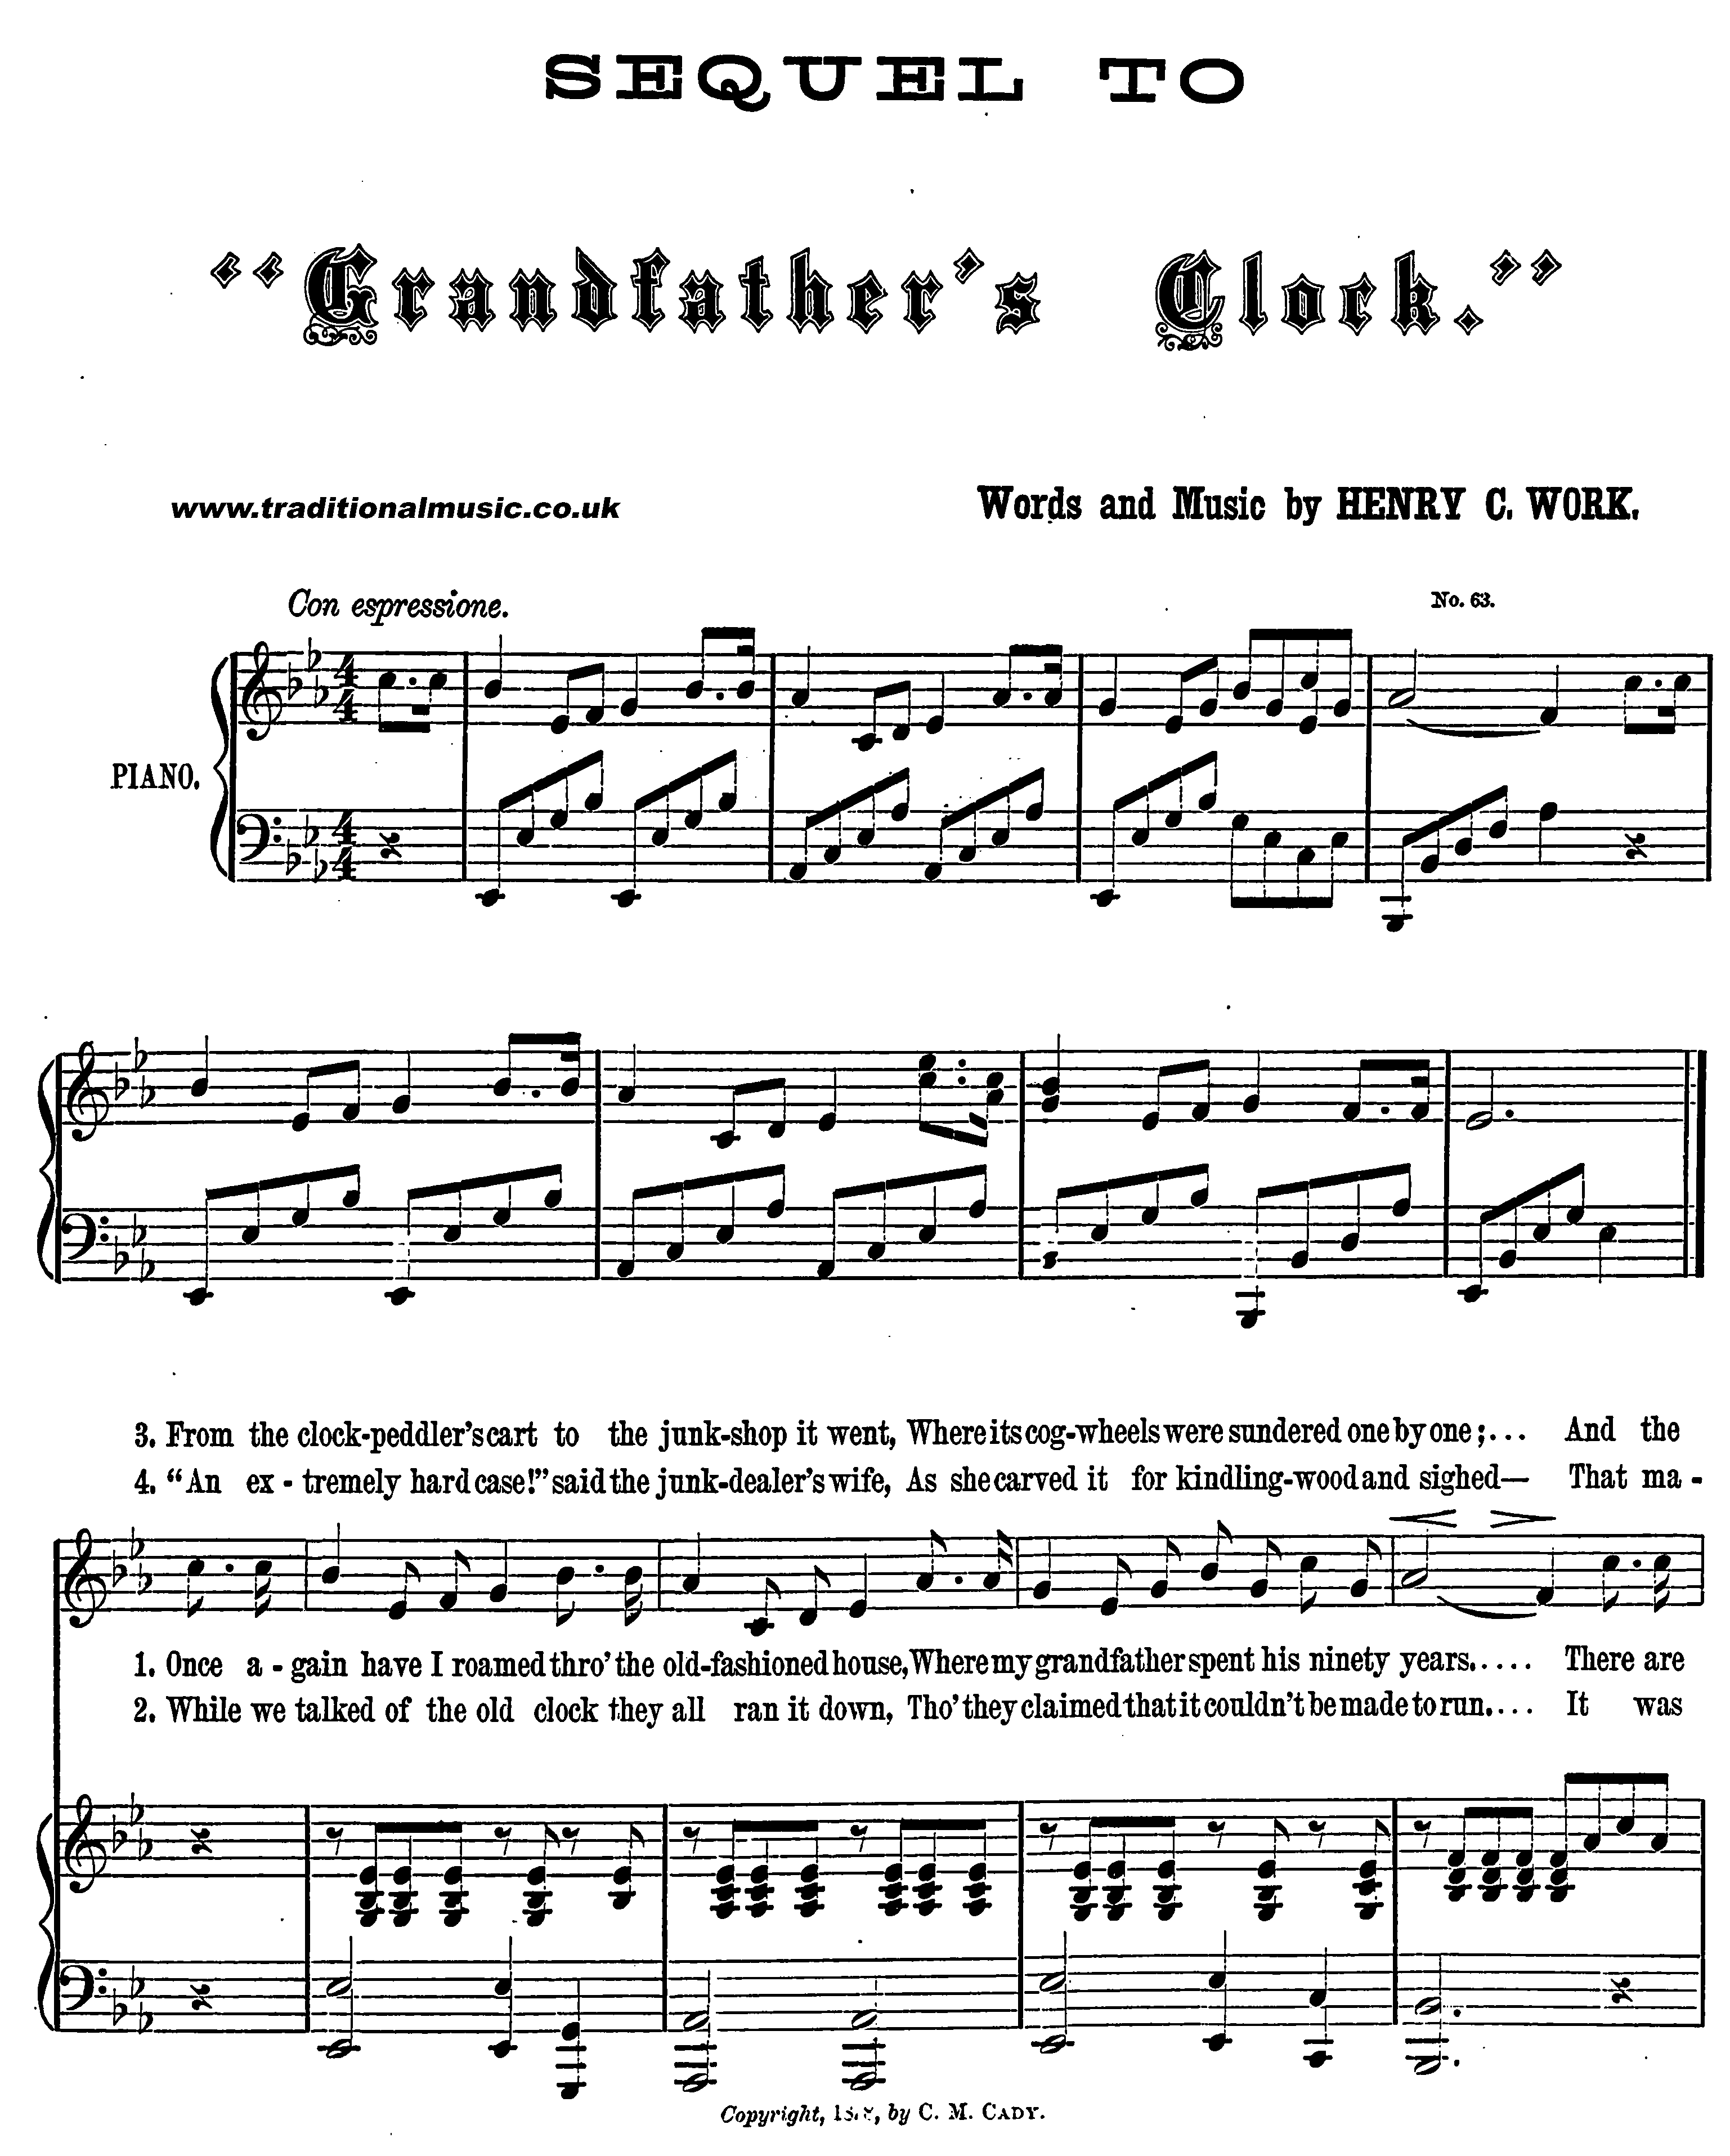 Grandfather's Clock Sequel, Sheet Music page 2